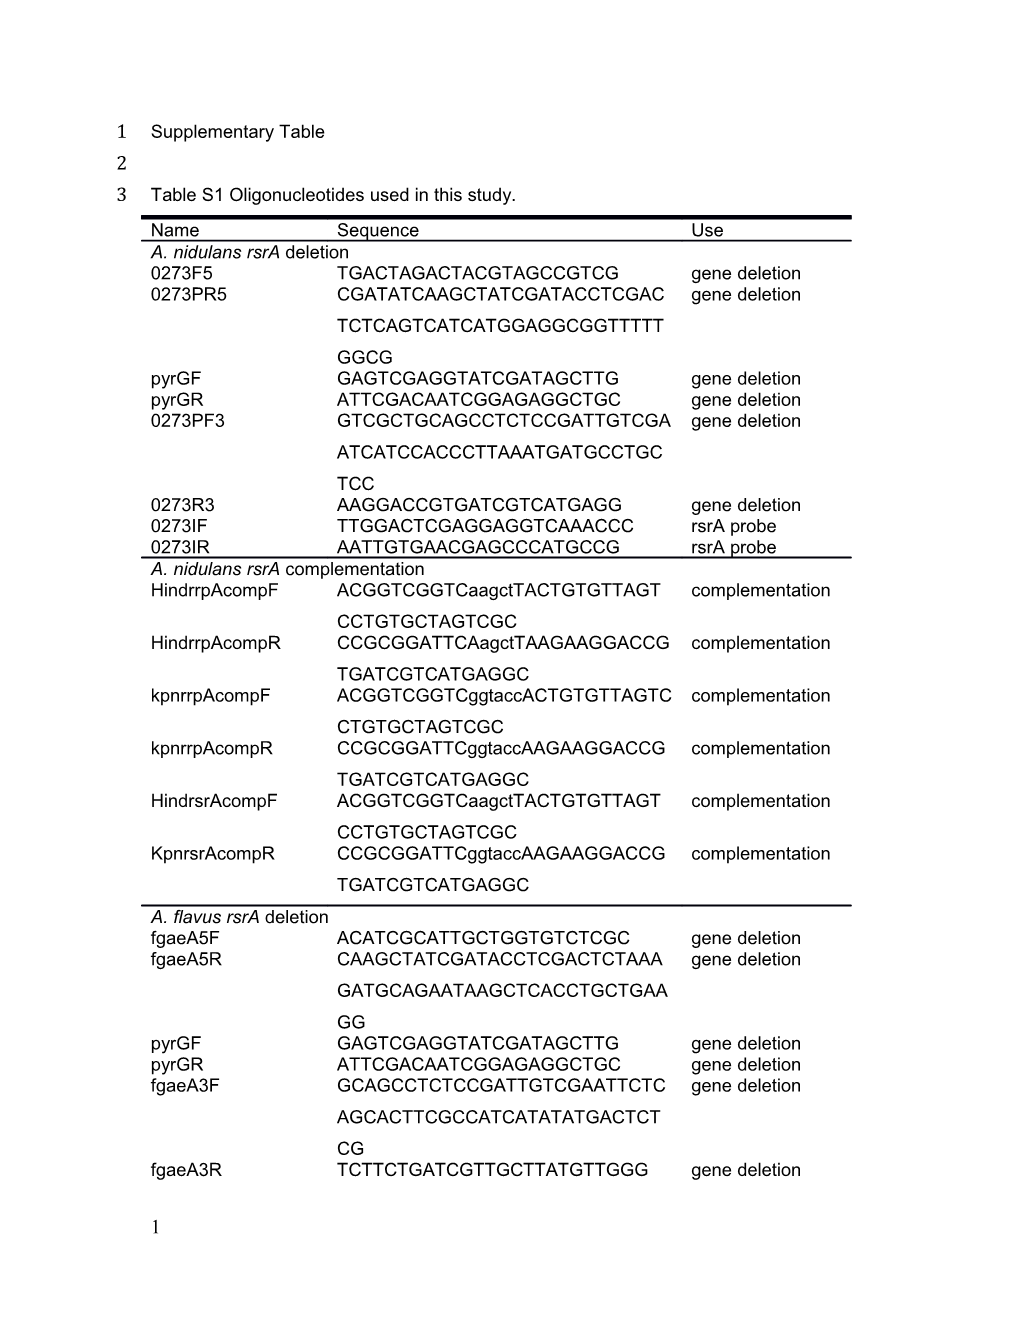 Table S1 Oligonucleotides Used in This Study